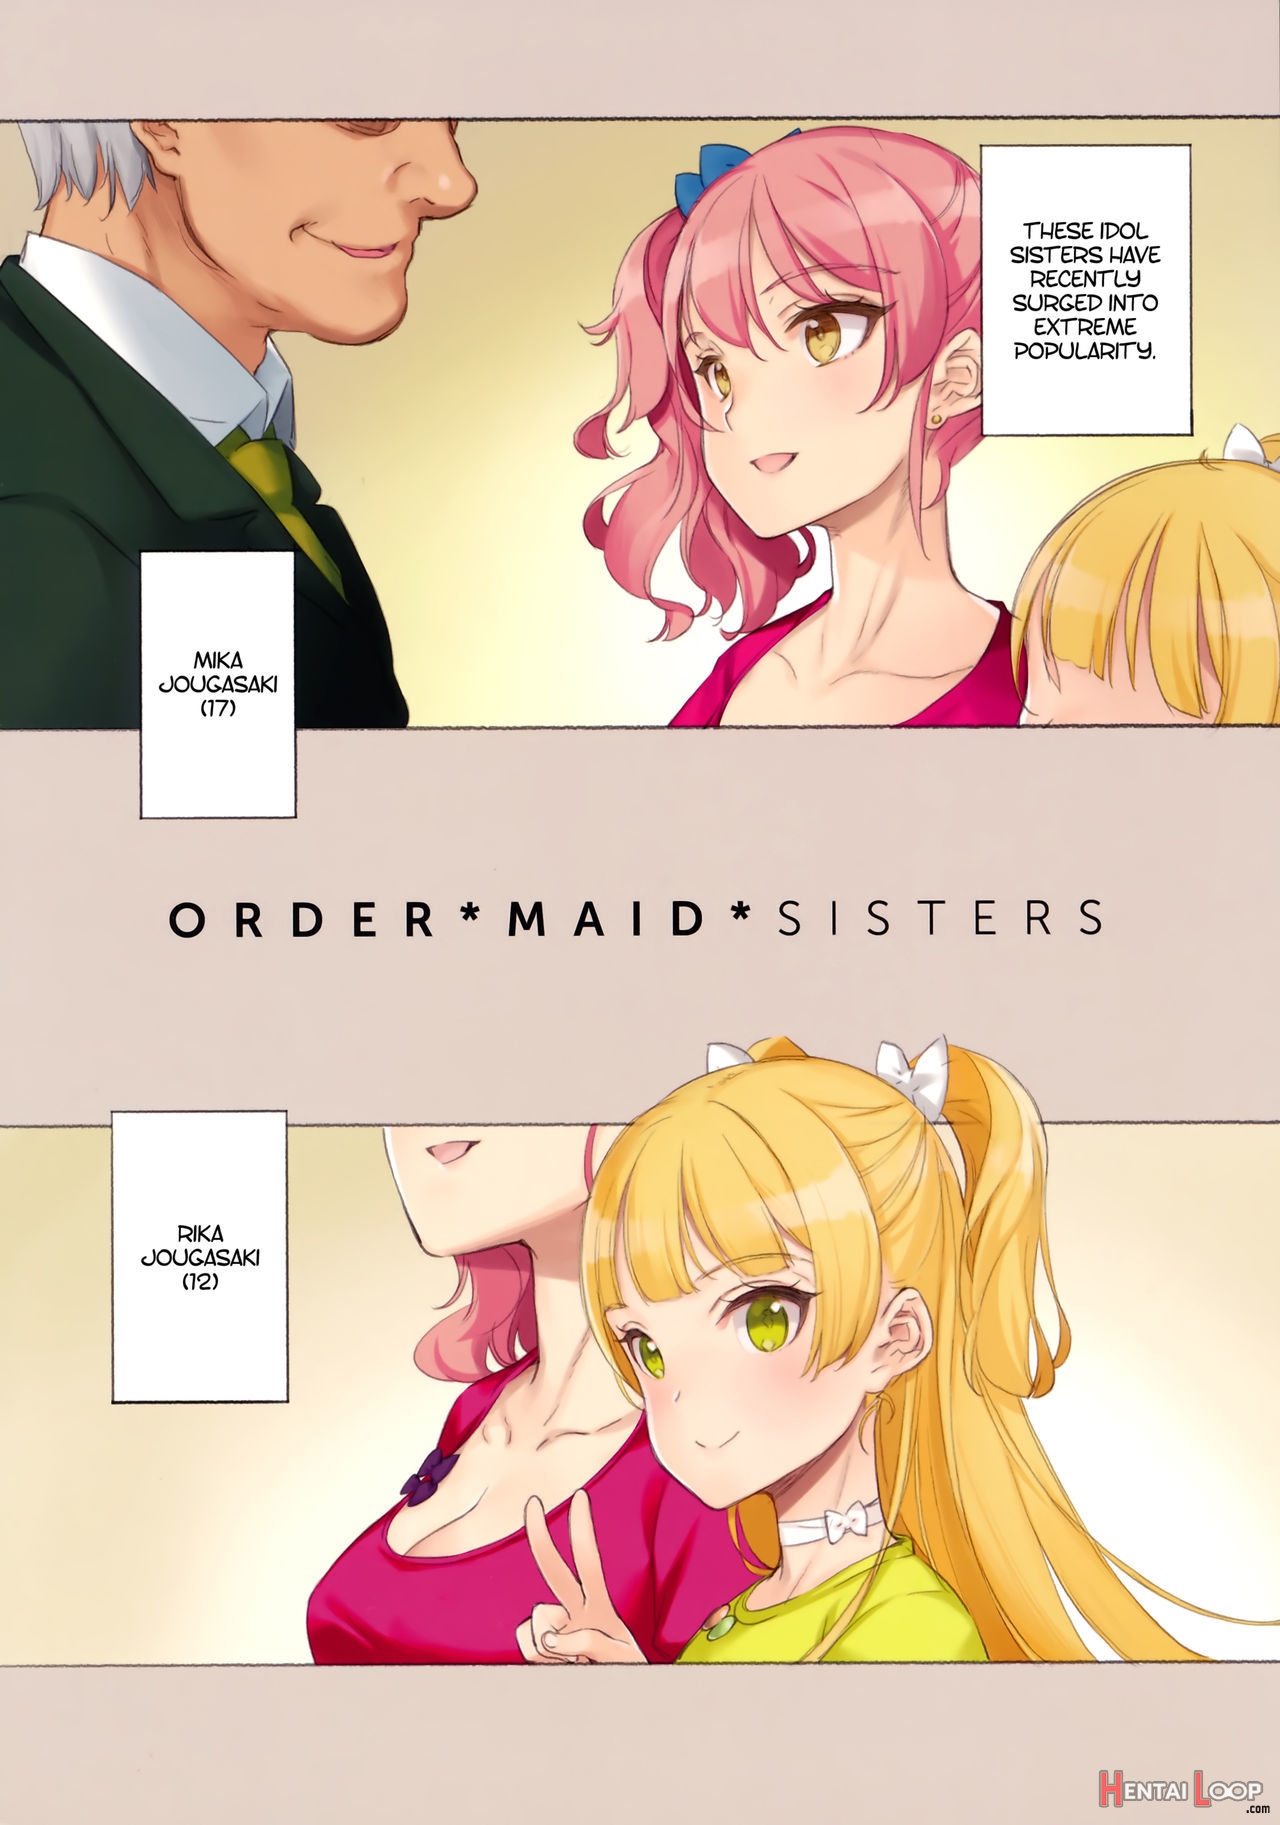 Order*maid*sisters - A Book About Having Maid Sex With The Jougasaki Sisters page 2